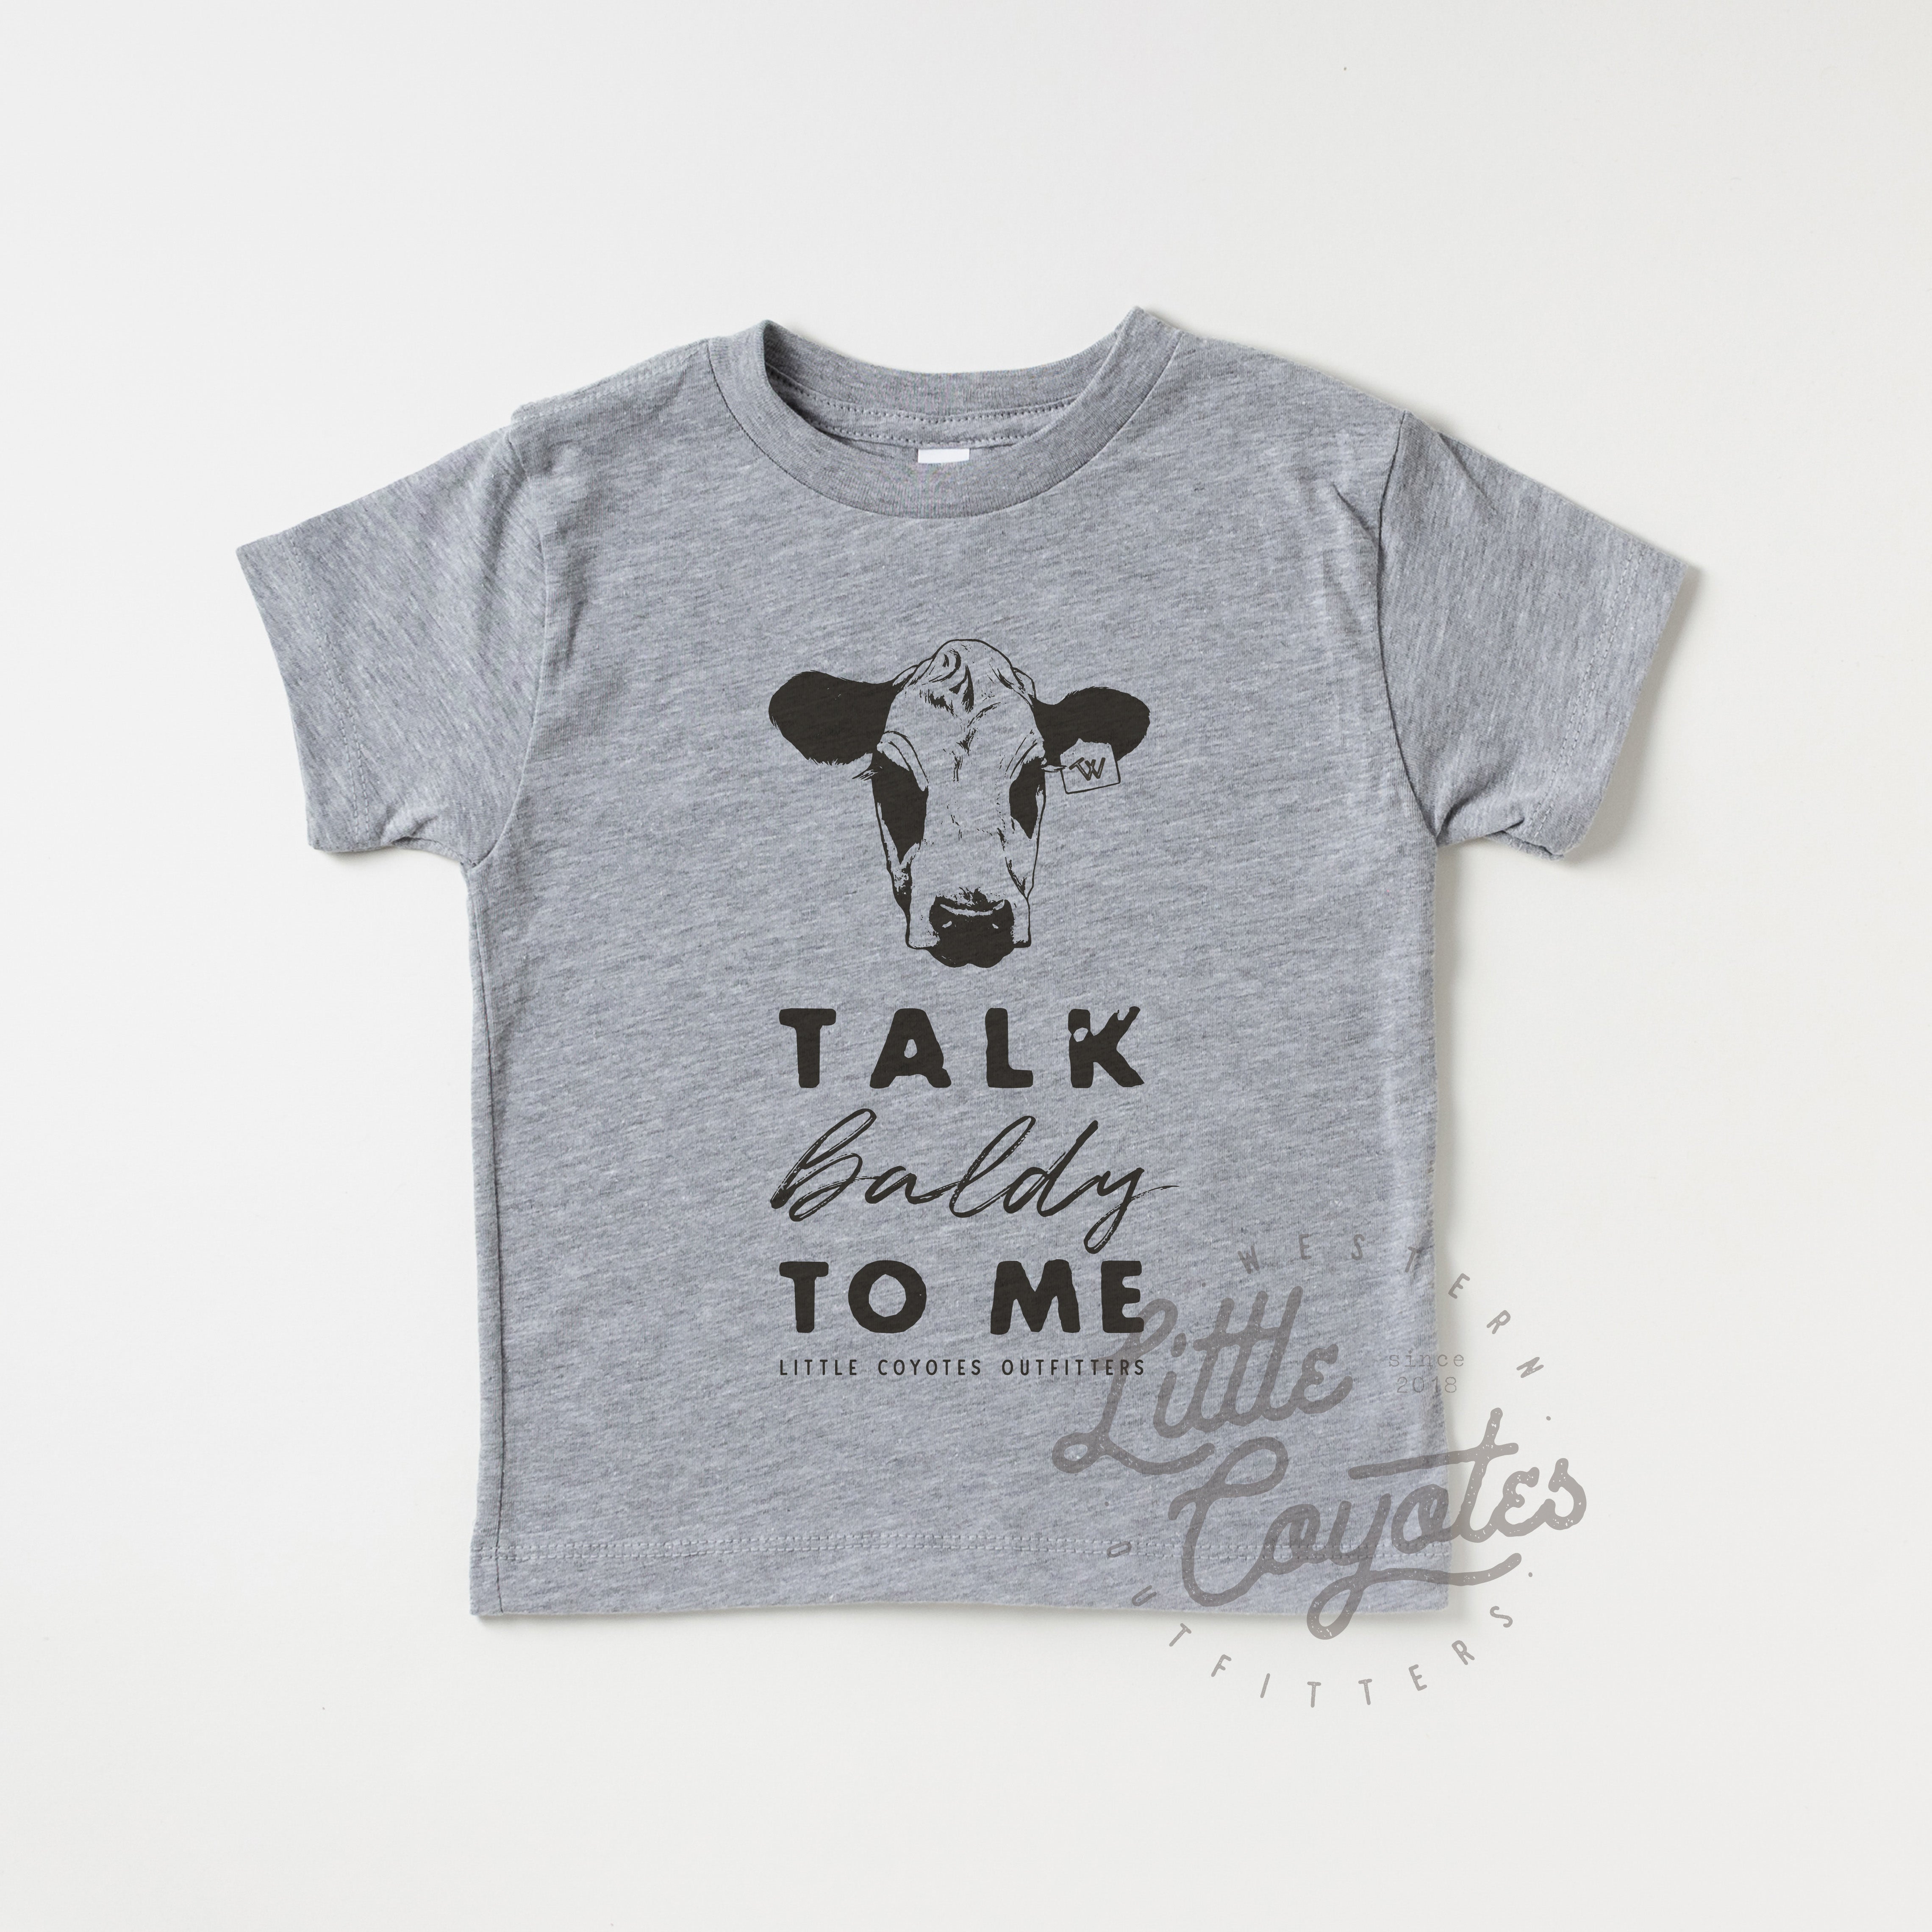 "Talk Baldy To Me" Infant Tee in Heather Gray